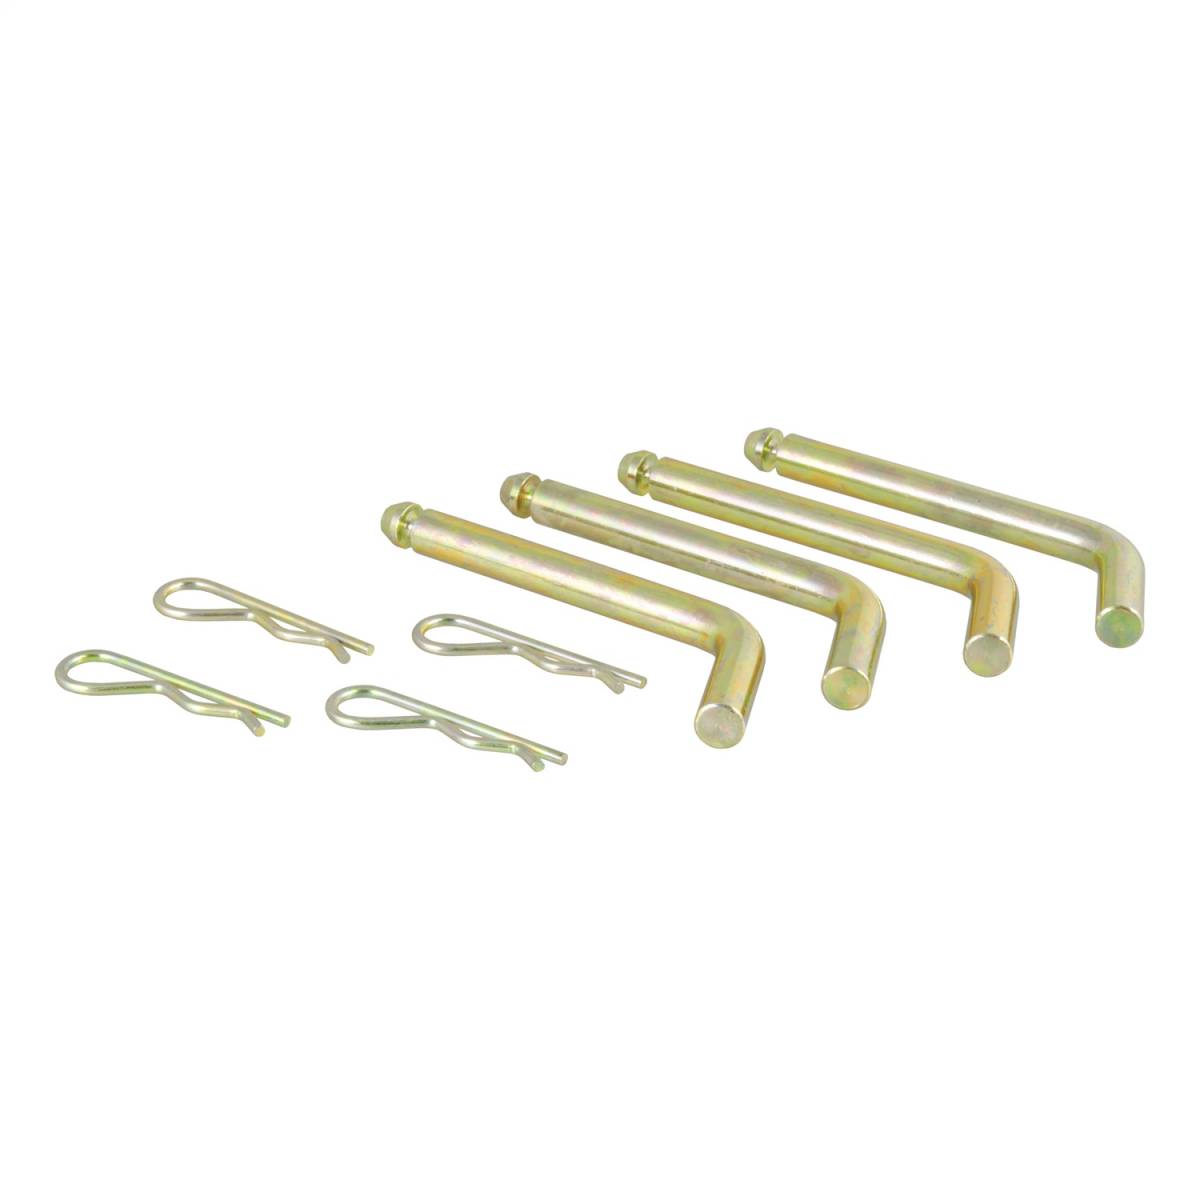 Fifth Wheel Replacement Pins and Clips, CURT, 16902 Nelson Truck  Equipment and Accessories